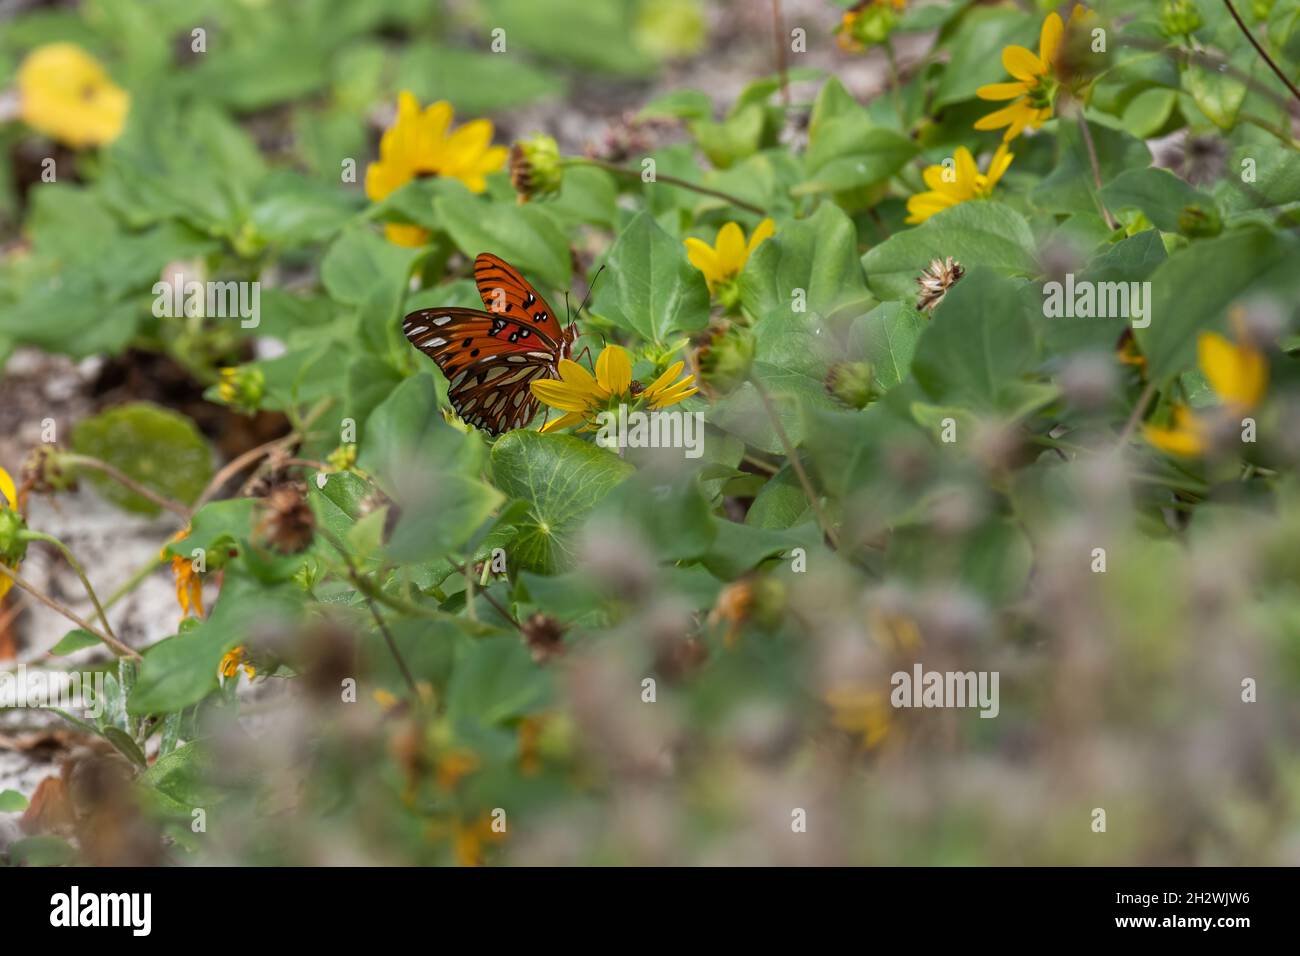 A gulf fritillary (Dione vanillae) butterfly on the blosoom of a beach sunflower (Helianthus debilis) in South Ponte Vedra, Florida. Stock Photo